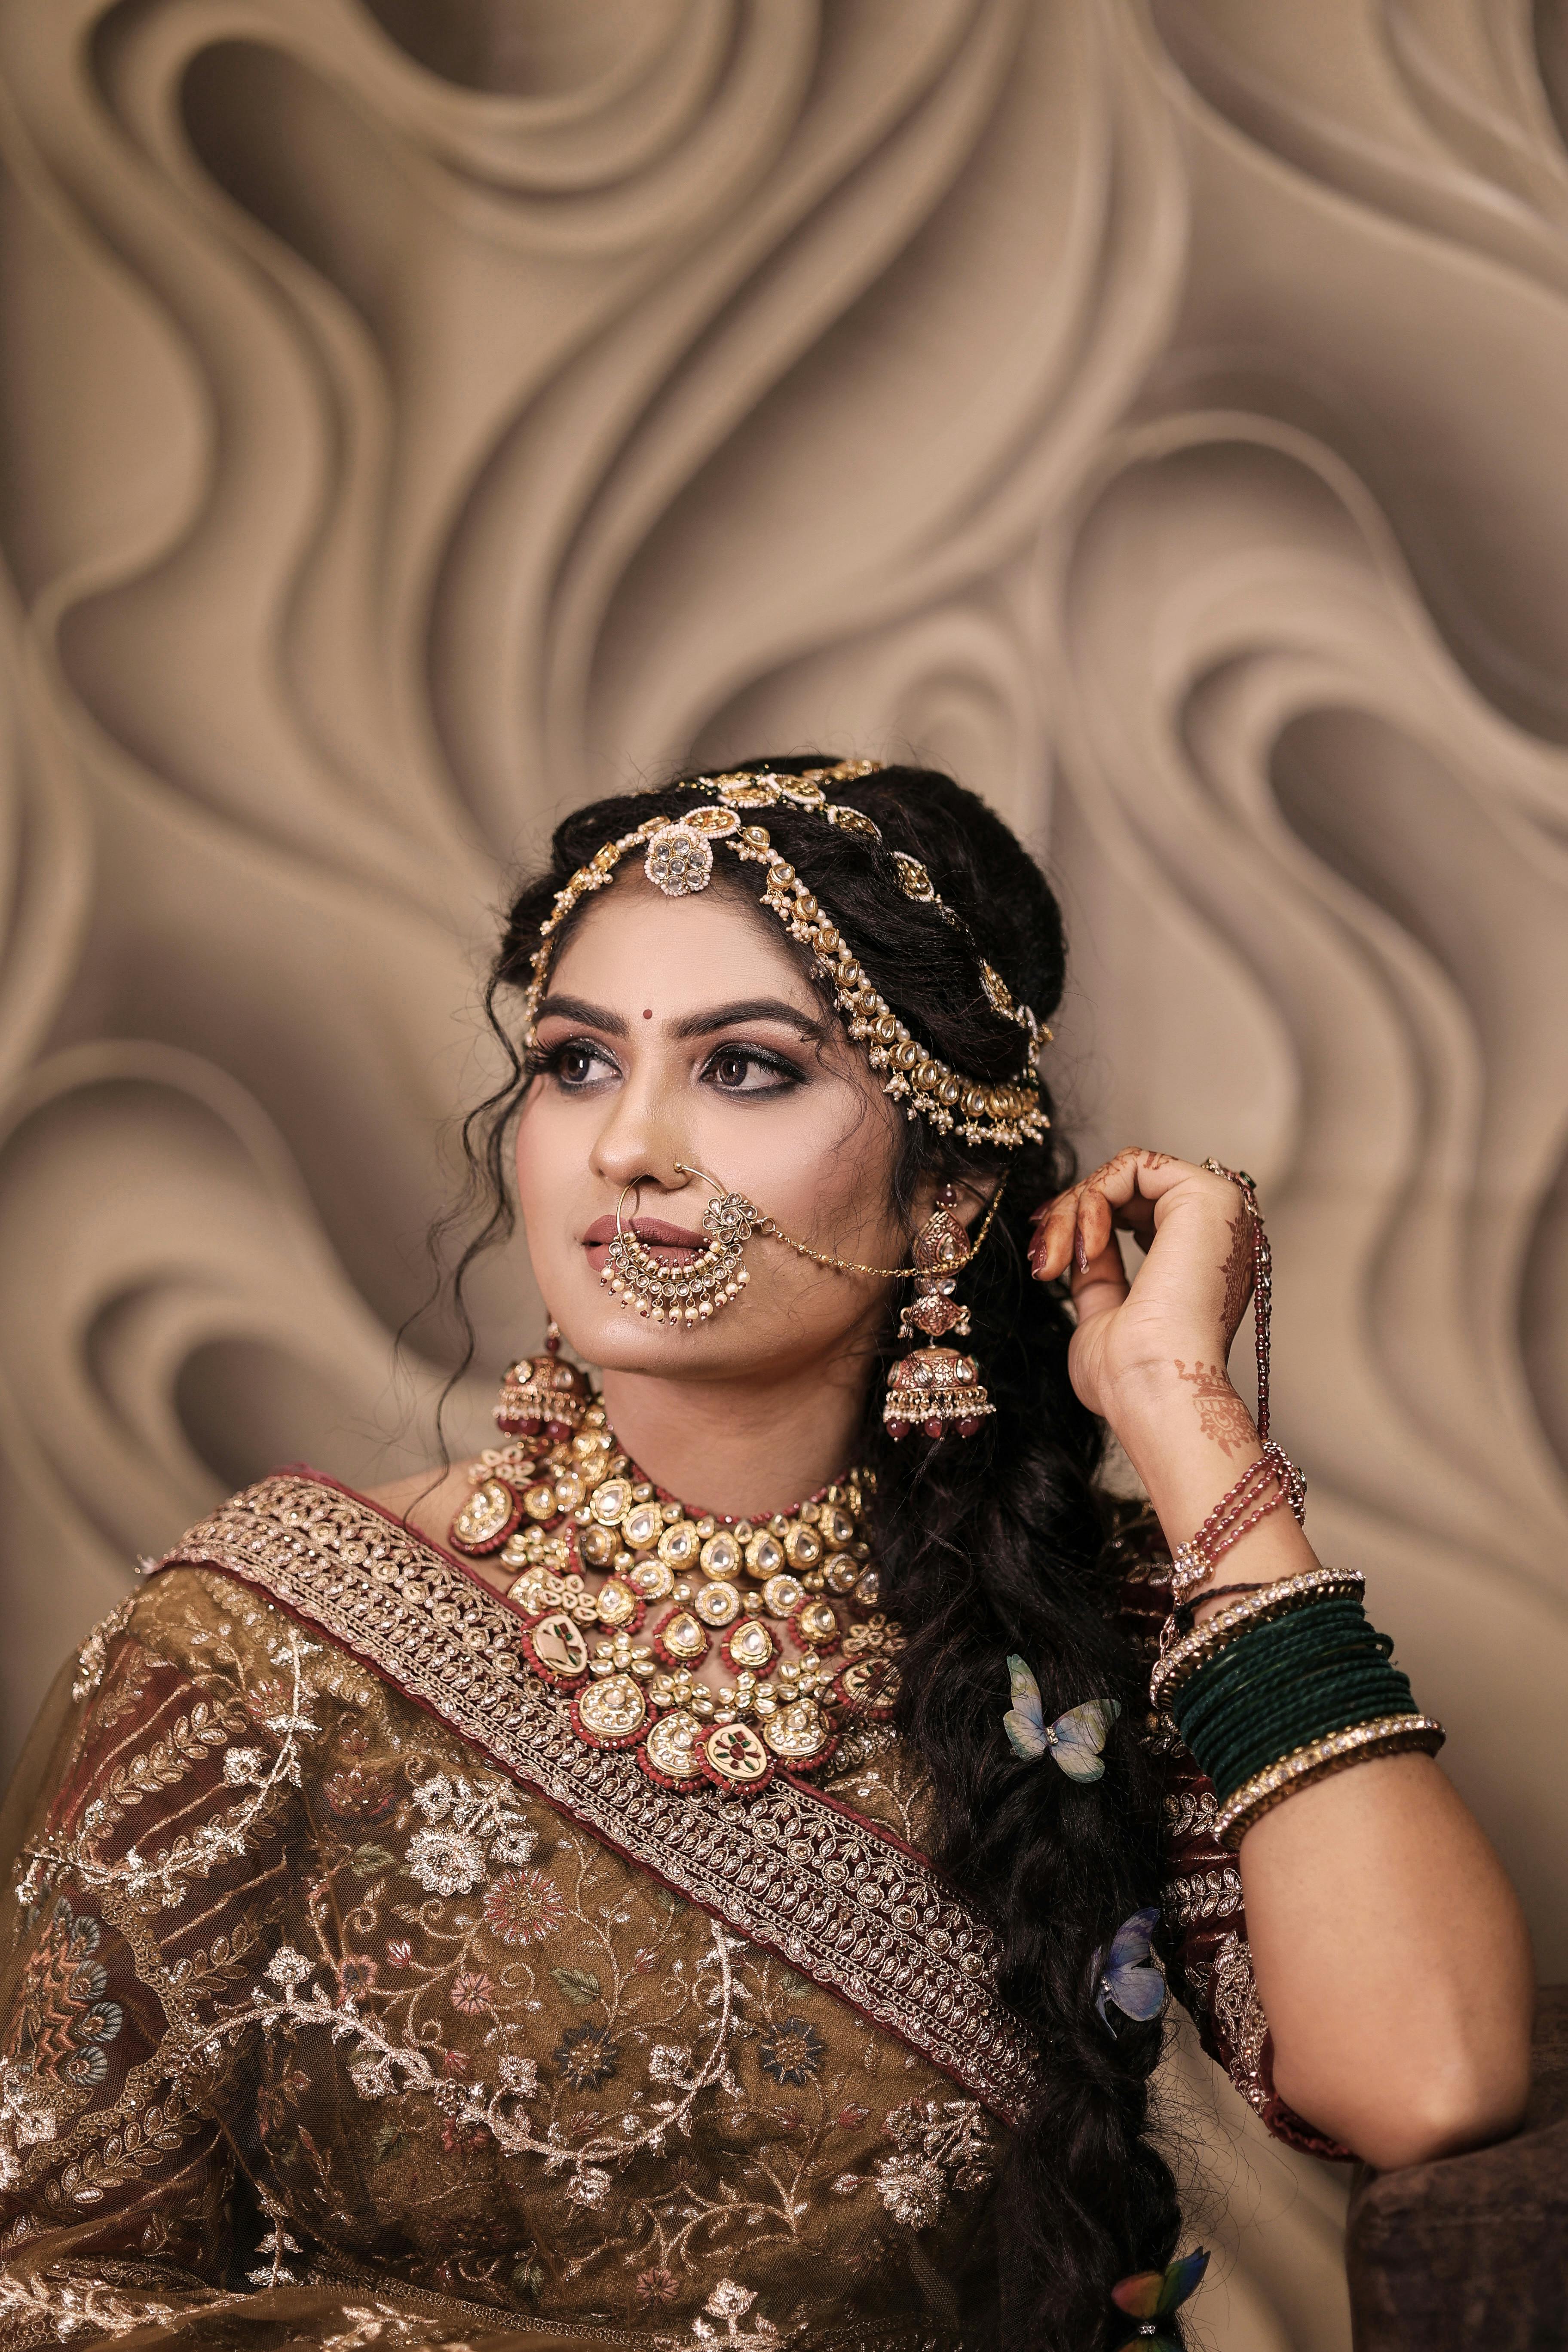 Woman in a Traditional Indian Wedding Dress · Free Stock Photo